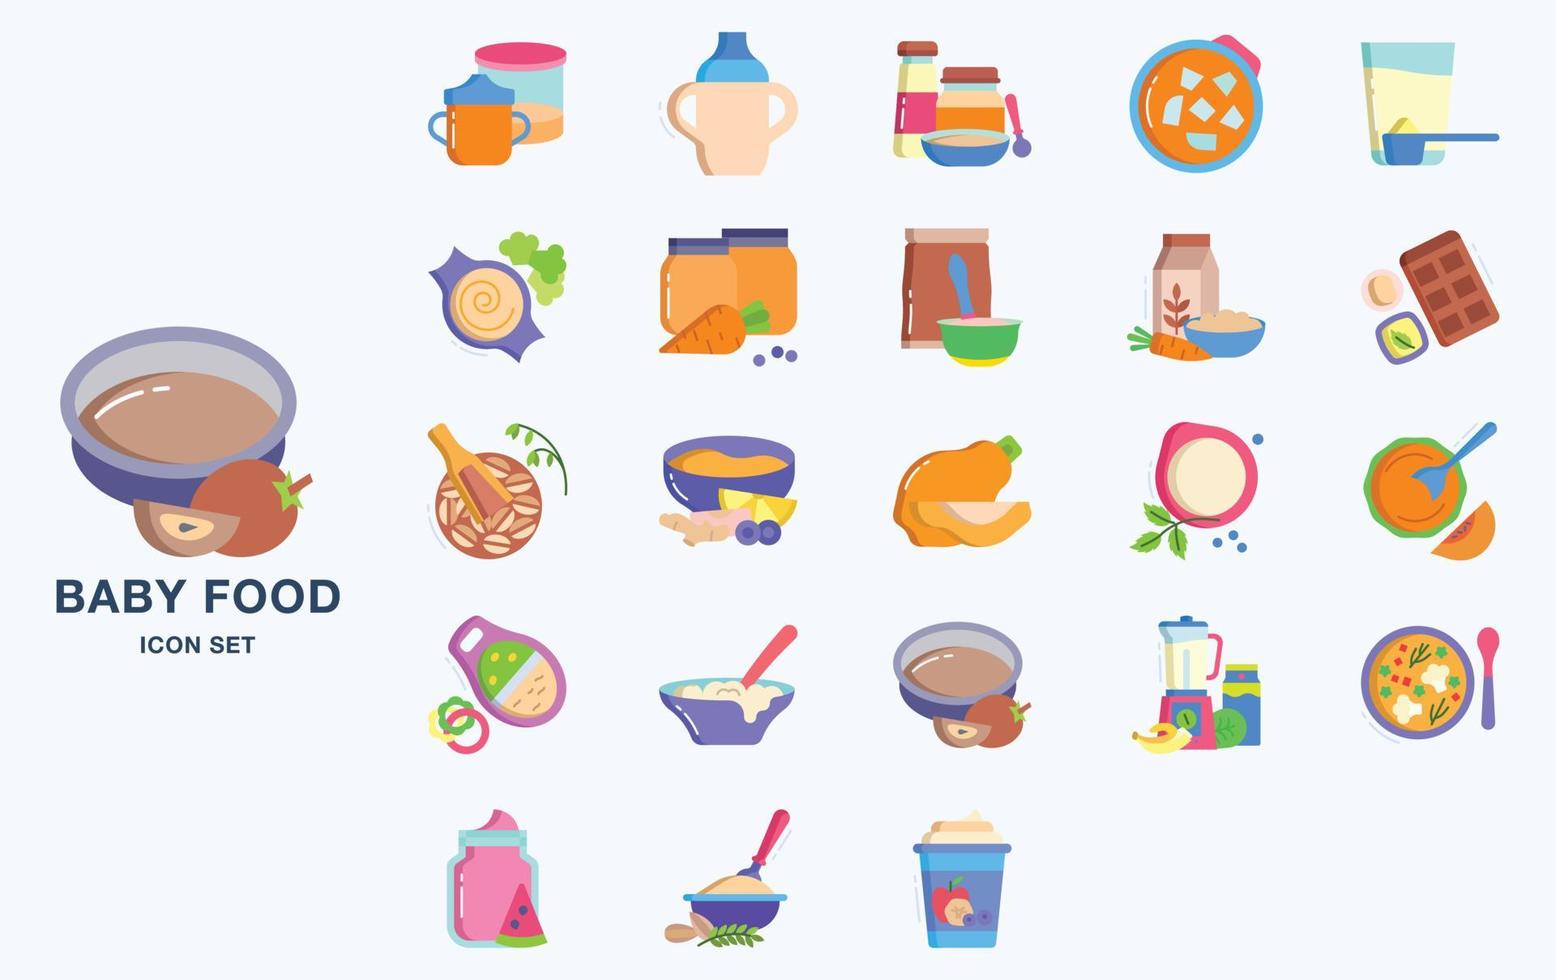 Variety of Baby Food icon set with different types of ingredients vector